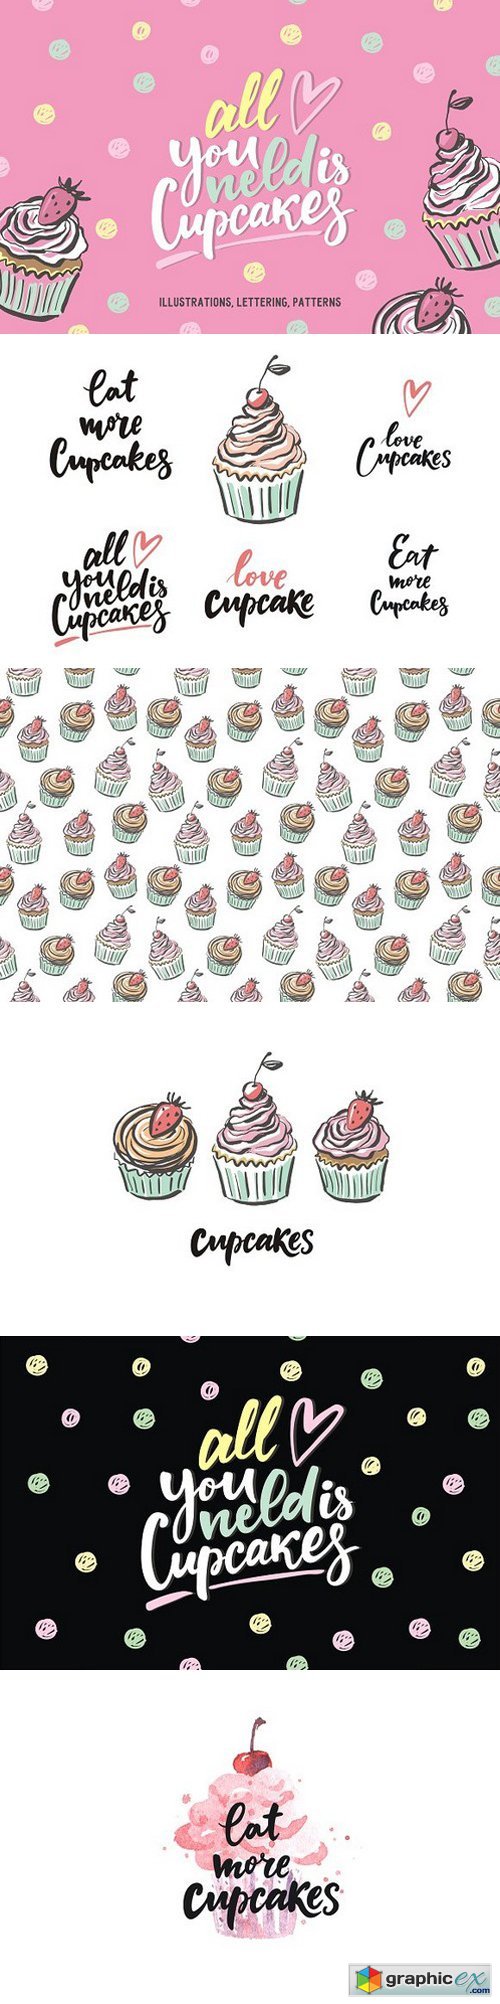 Cupcake pattern, lettering, cards